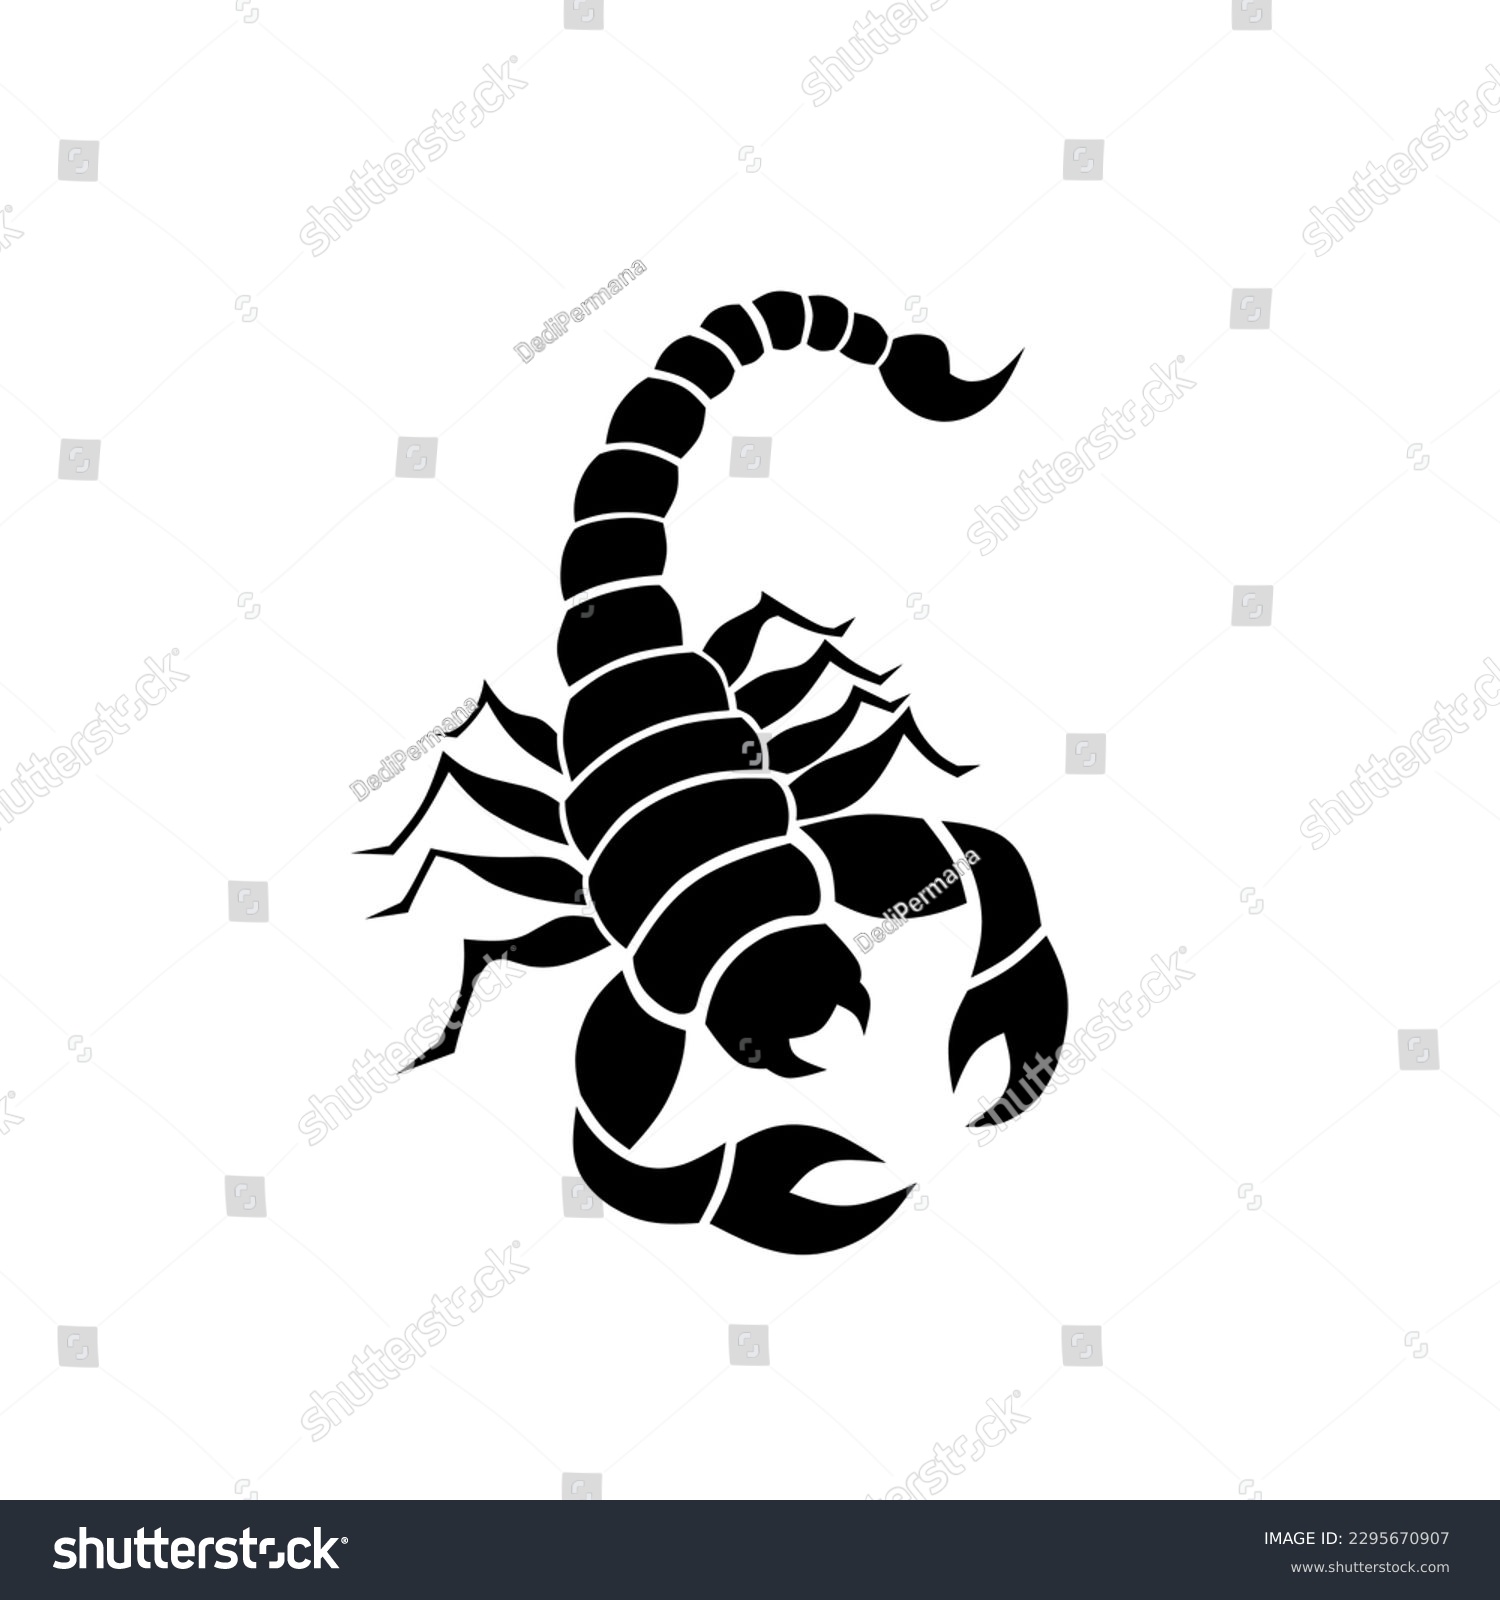 SVG of Scorpion animal silhouette illustration design vector in black color.  This animal is very dangerous because it has a deadly poison svg